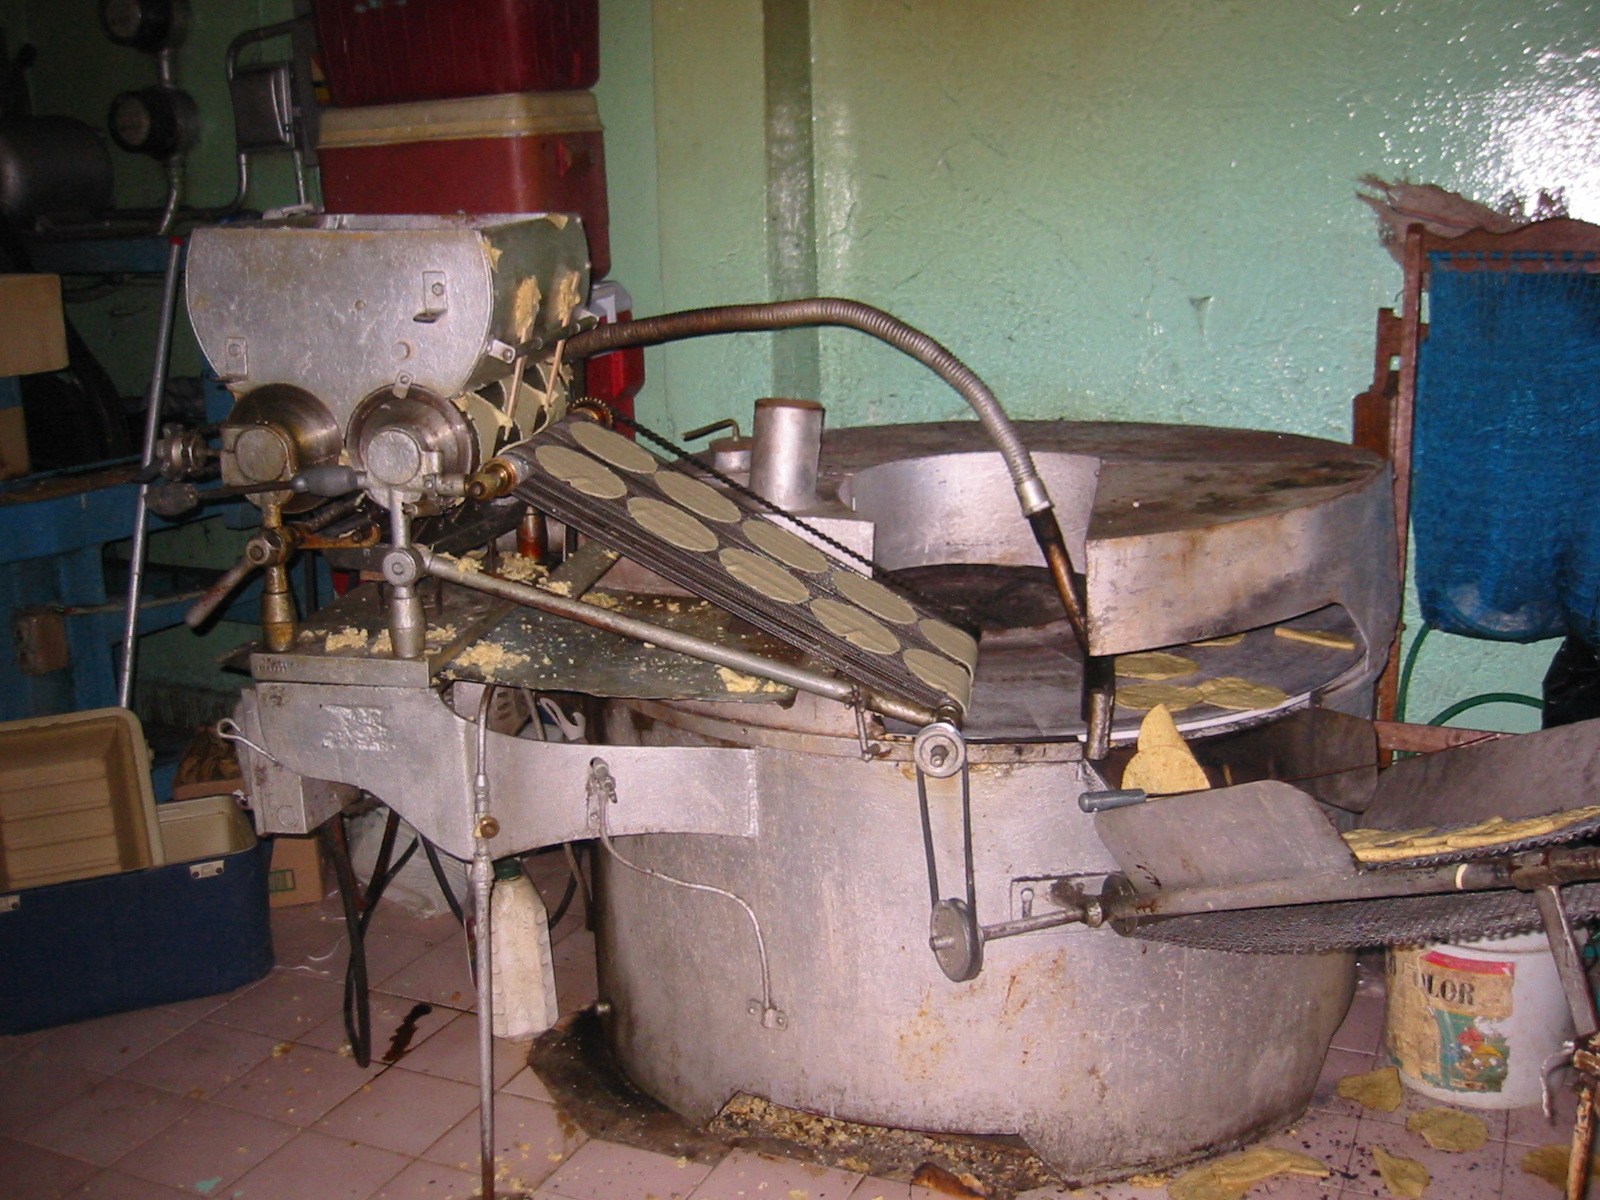 Explanation of the machine: Image:Tortilla machine explained.jpg 28 December 2006